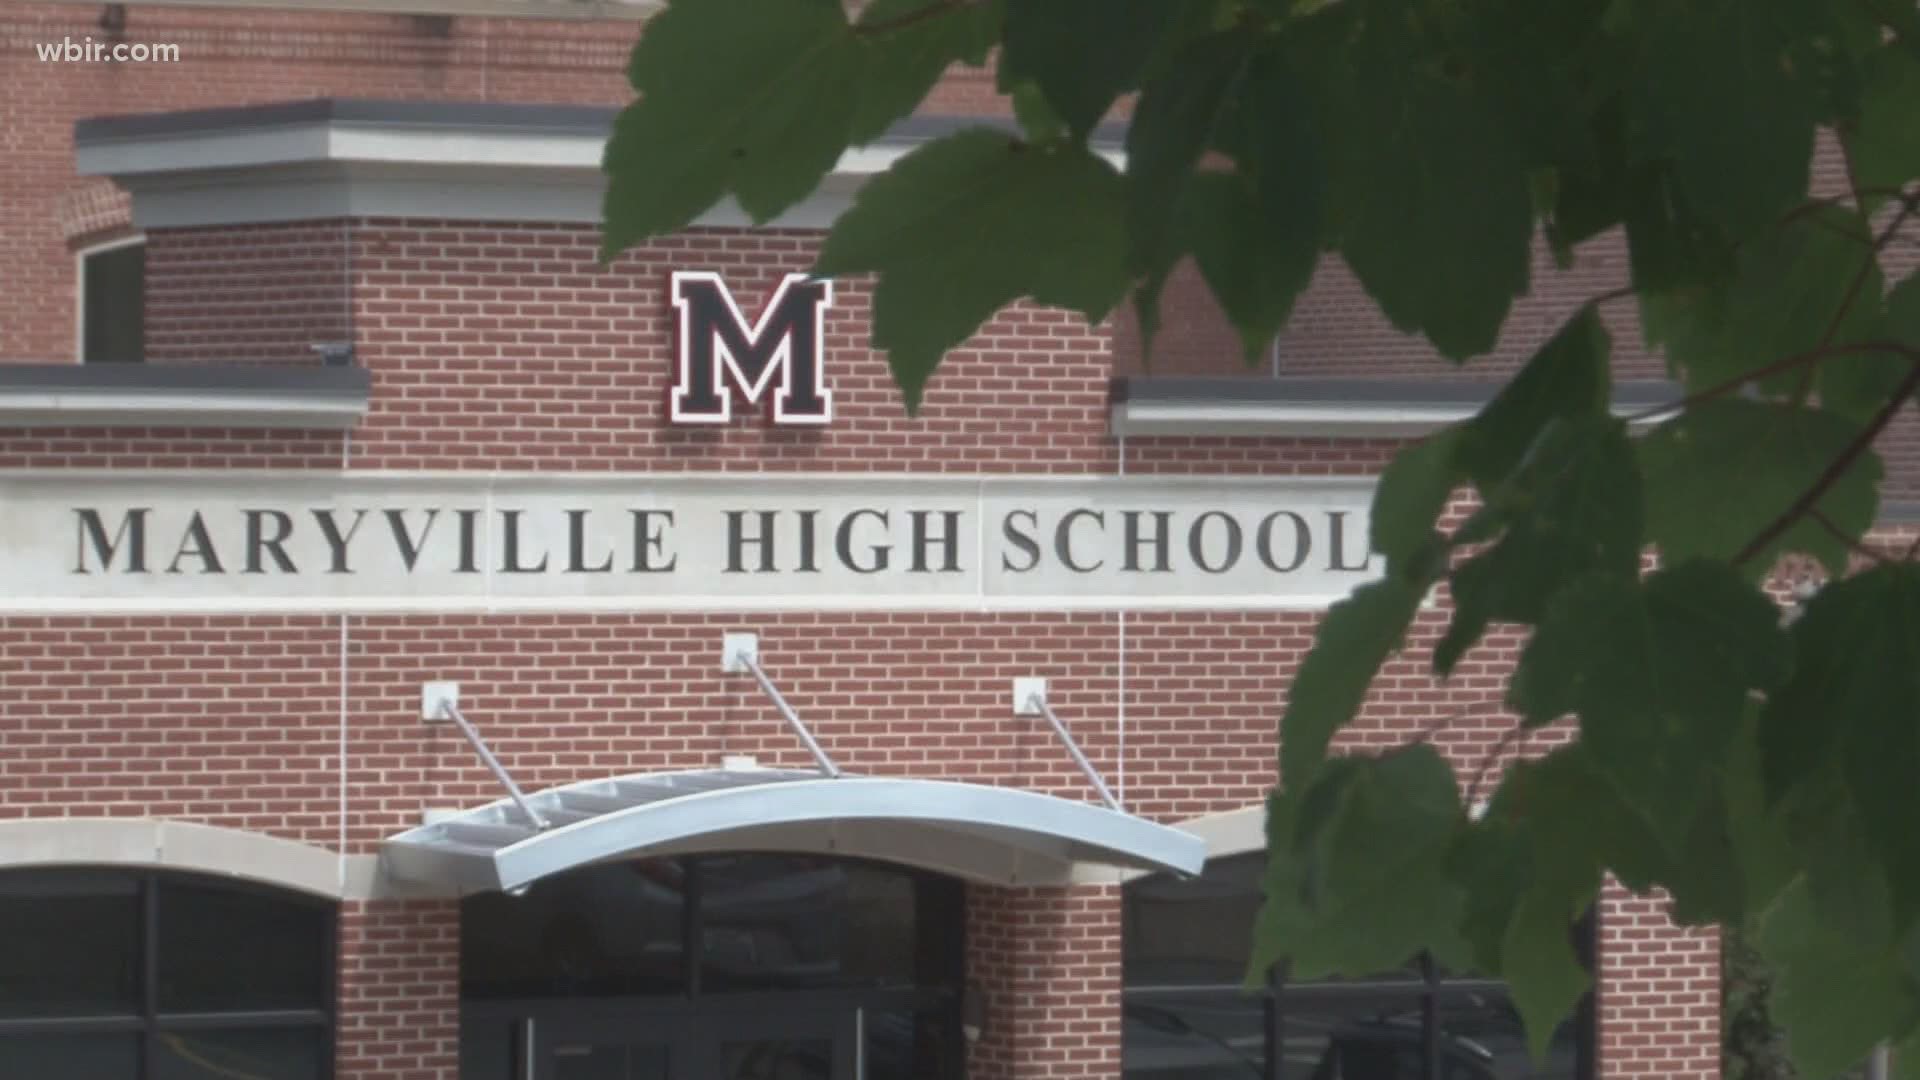 A group of Maryville High School alumni is petitioning to change the school's "red rebels" nickname. They say it's offensive and the school should re-evaluate.